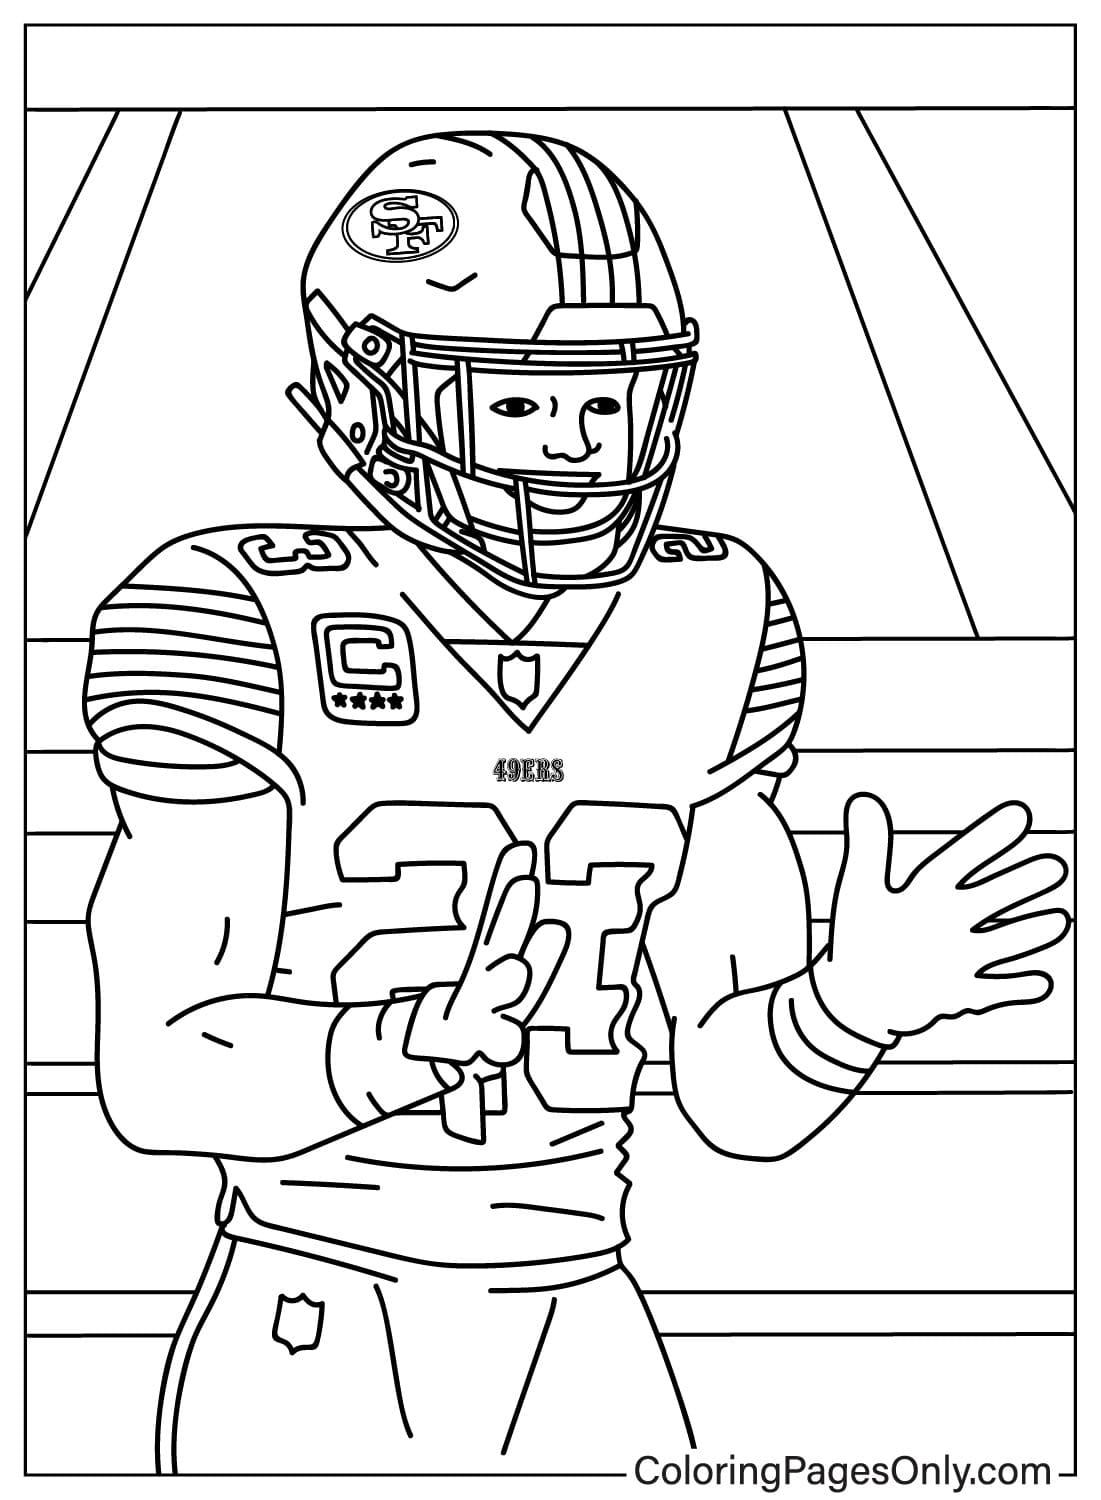 Christian McCaffrey Coloring Page from San Francisco 49ers